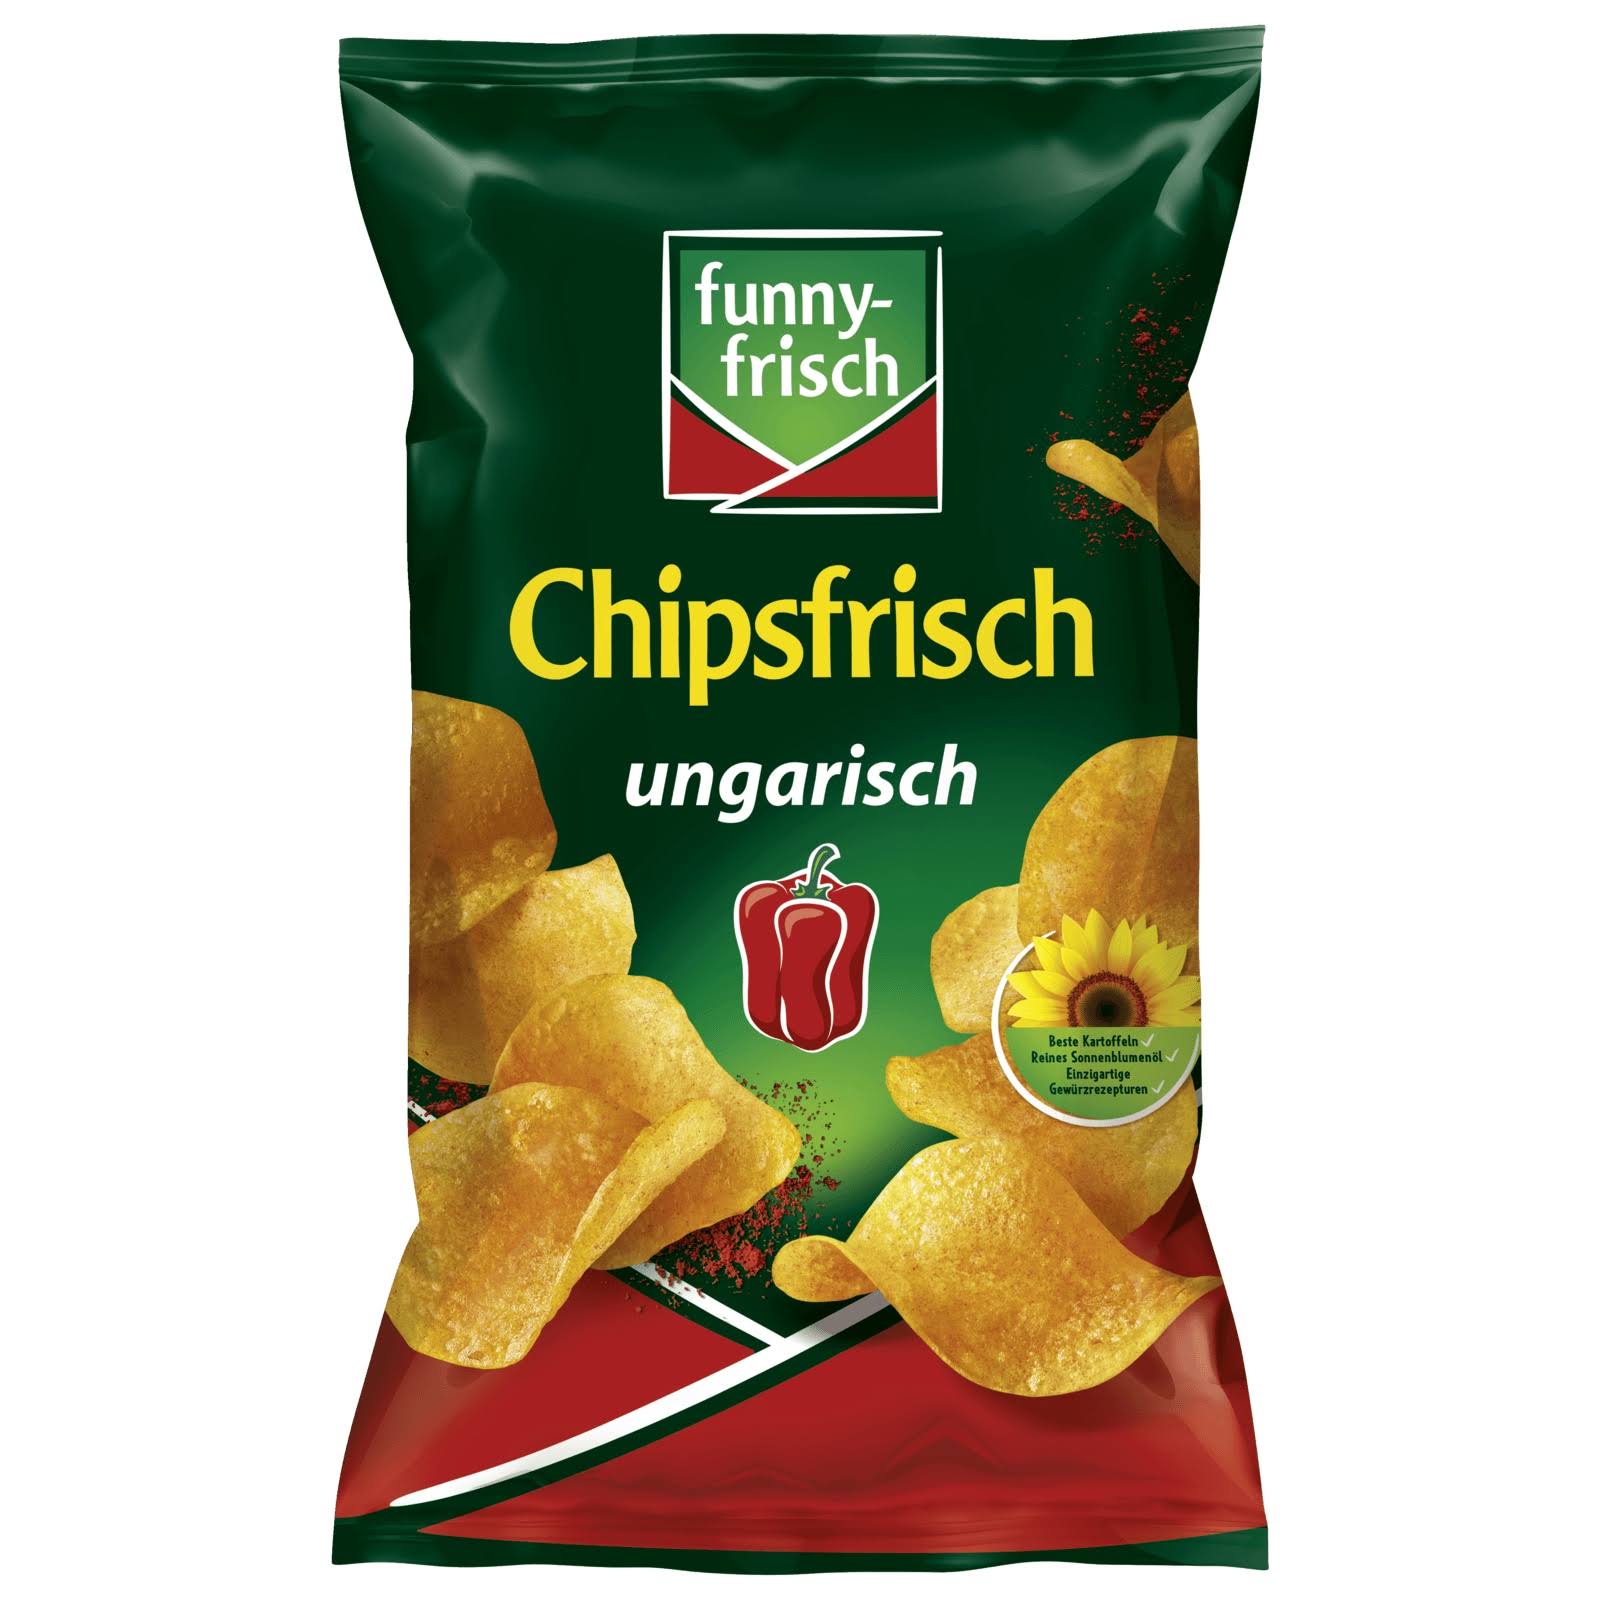 funny-frisch Chipsfrisch Hungarian Style 5.29 oz Bag